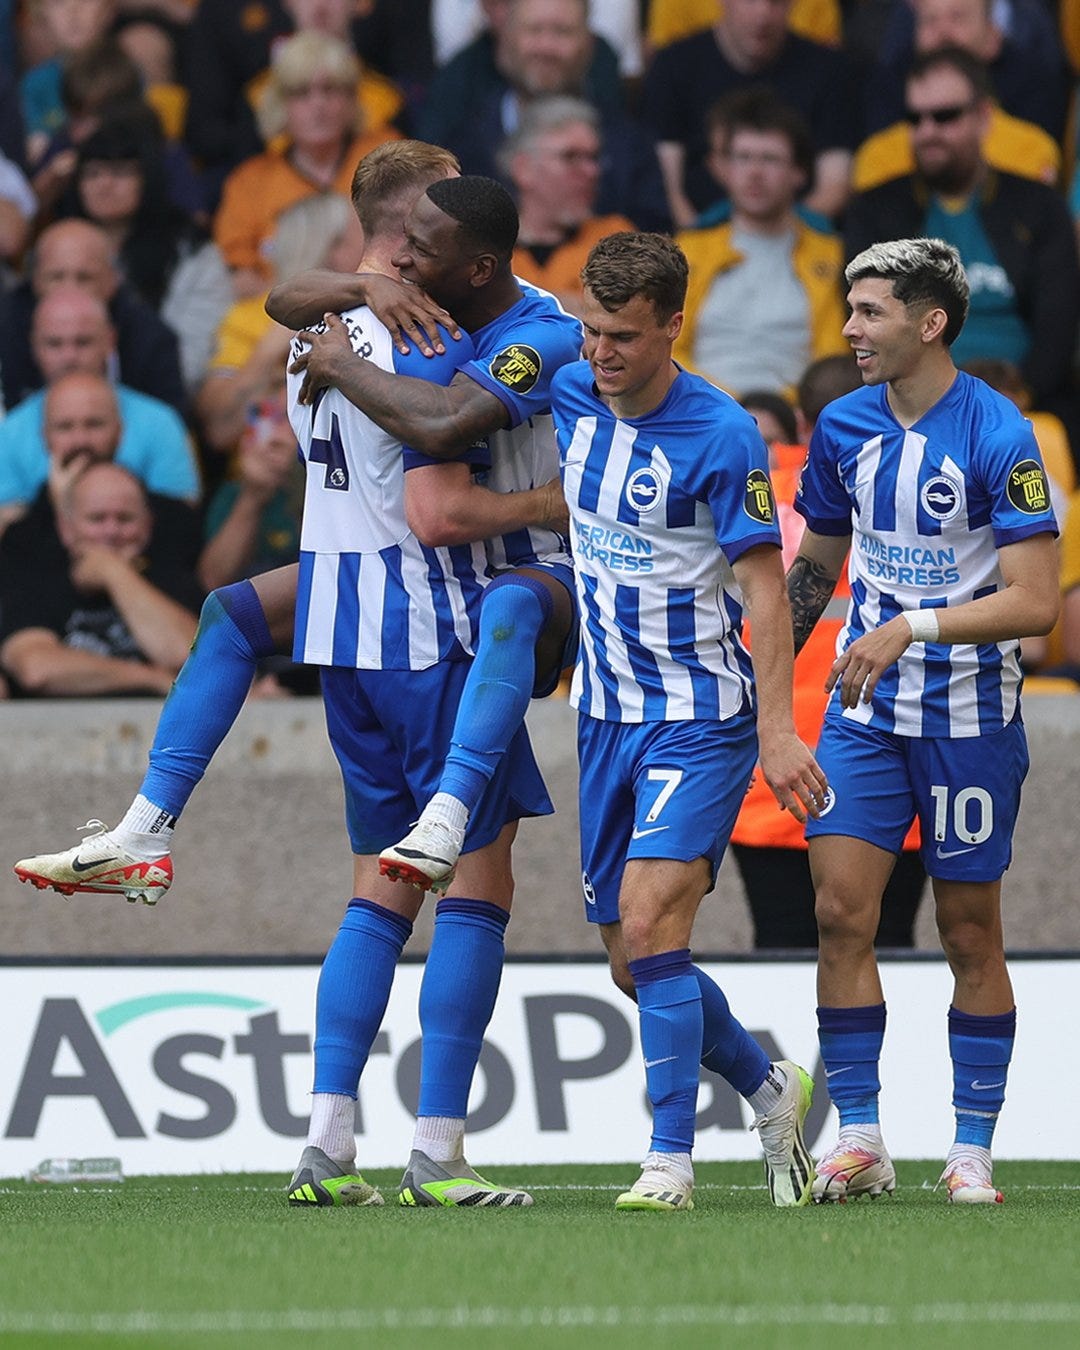 Pervis hugs Adam Webster after scoring against Wolves, with Solly and Julio smiling alongside them. Squad goals.